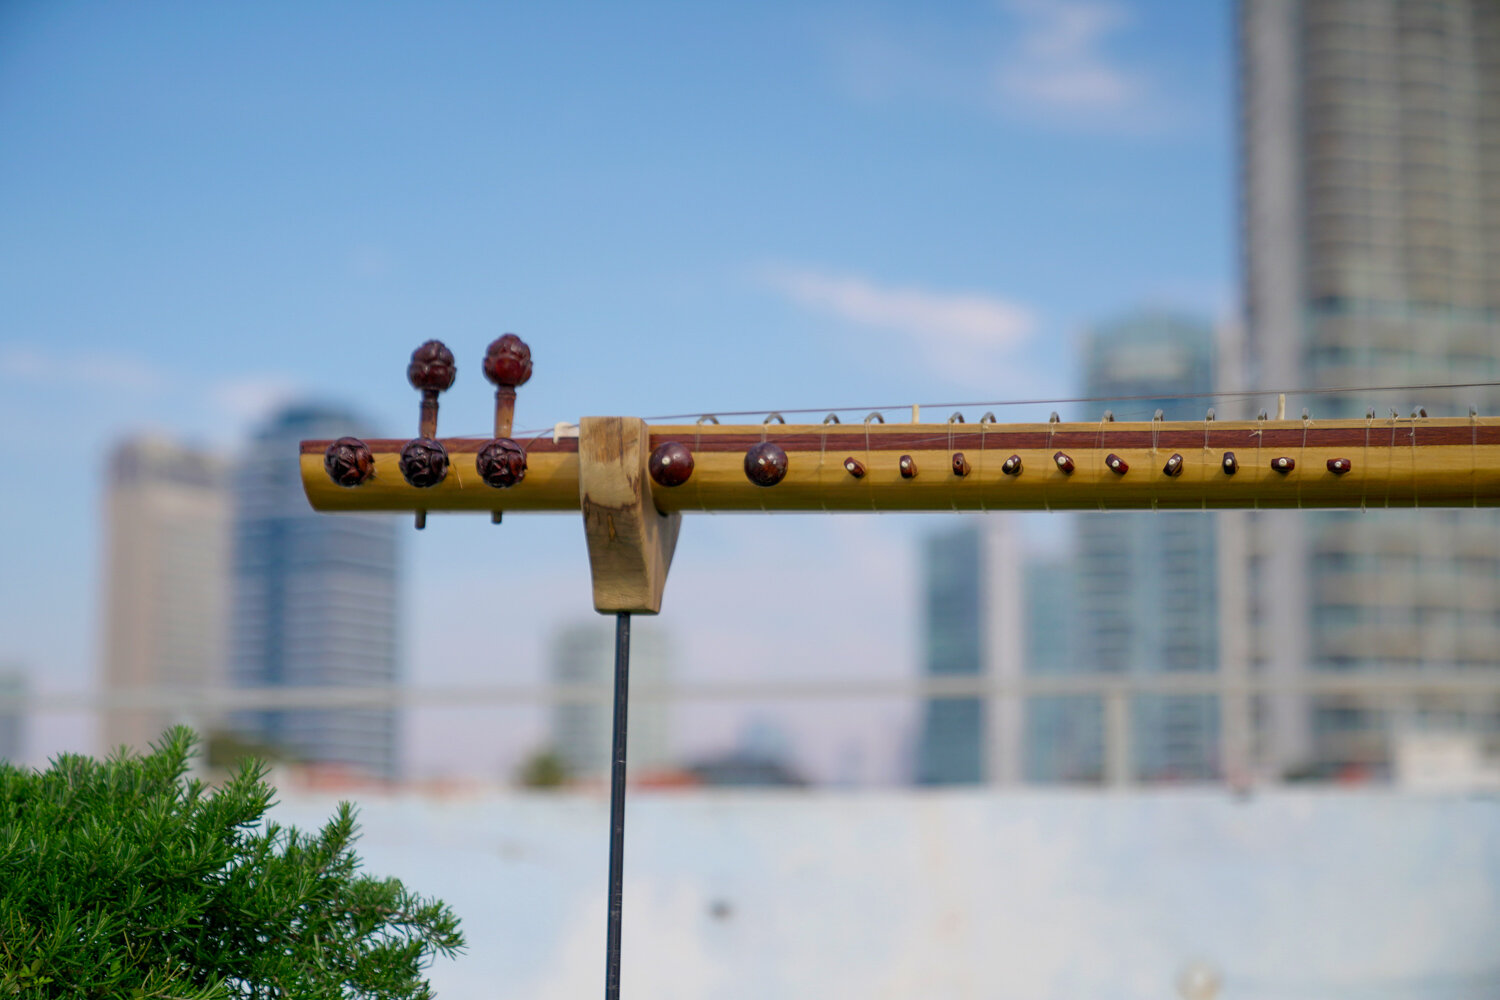 Detail of " The Singing of the Drones", wooden beehive sitar and wiled Israeli flowers, 2020 | Photo: Yotam Eytan.